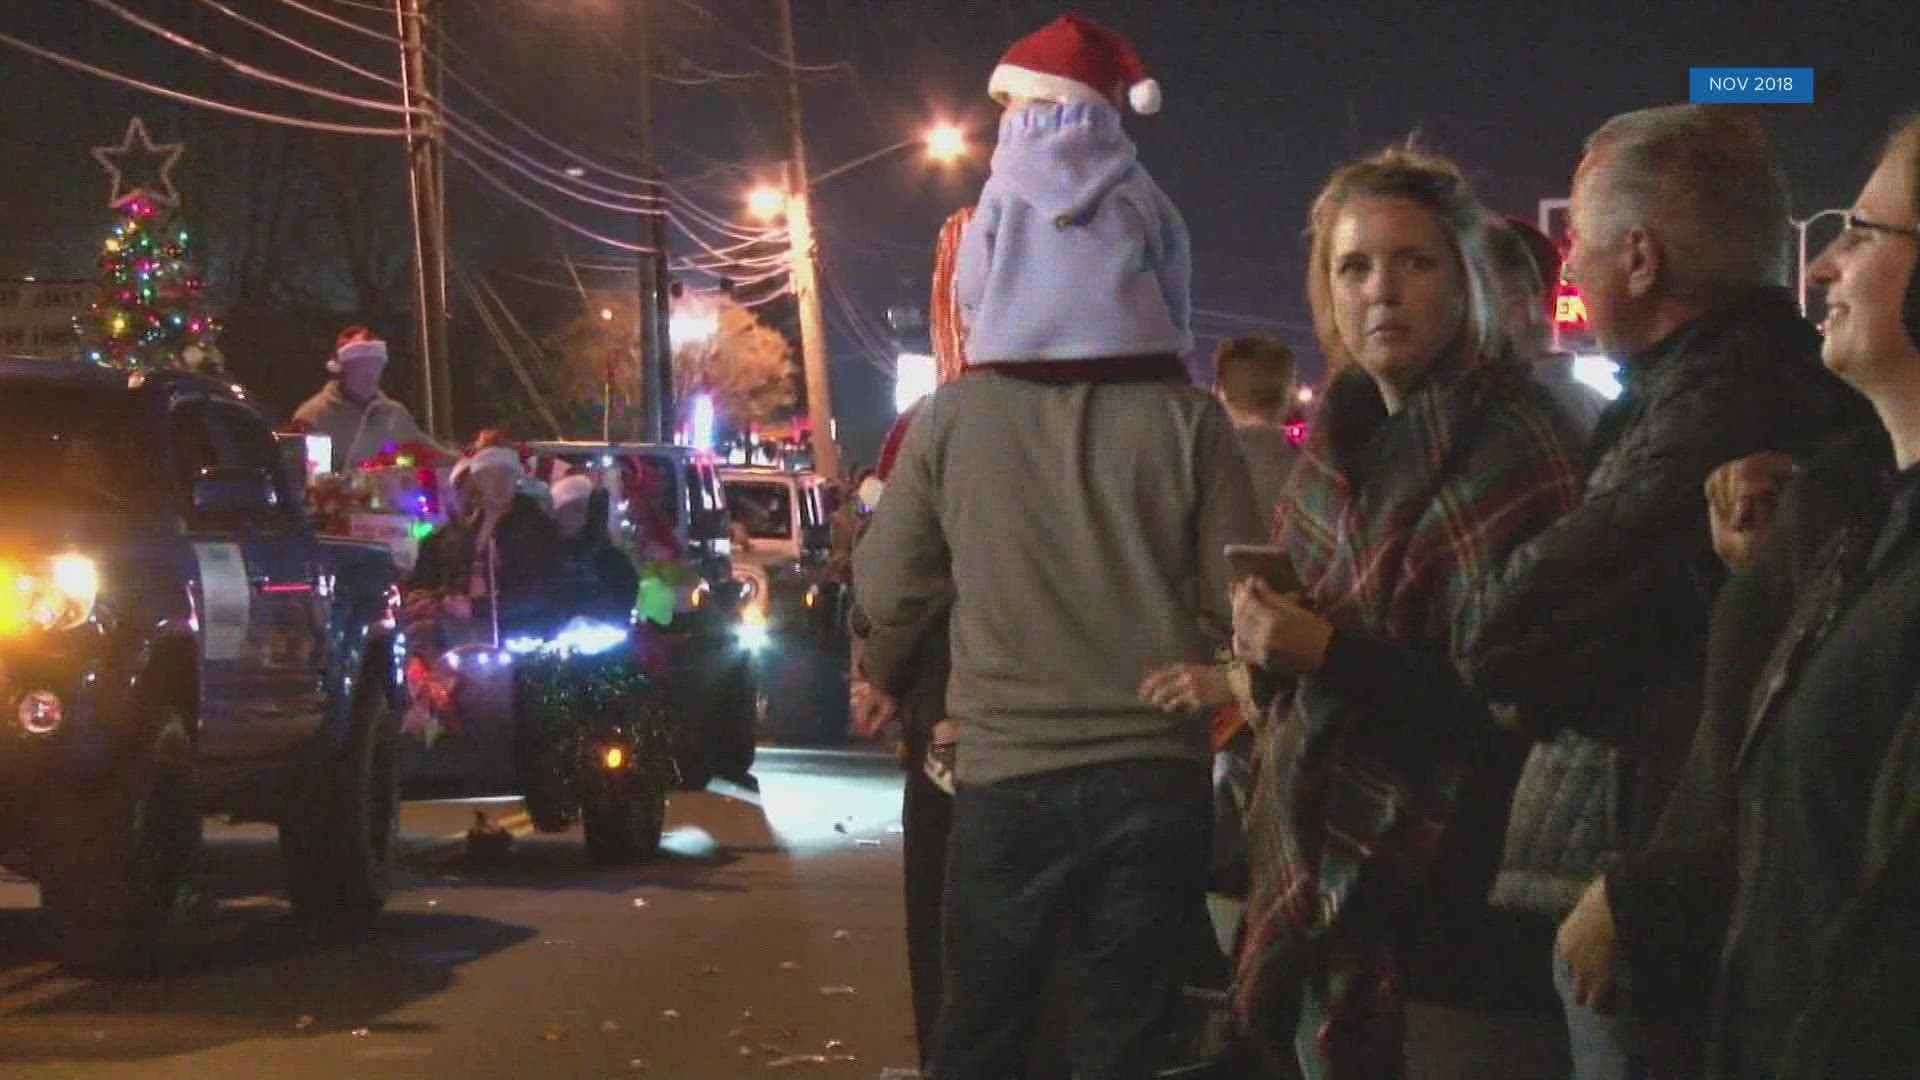 Christmas parades will soon bring the festive spirit to East Tennessee. One local organization shared safety tips on how to have fun and stay safe.